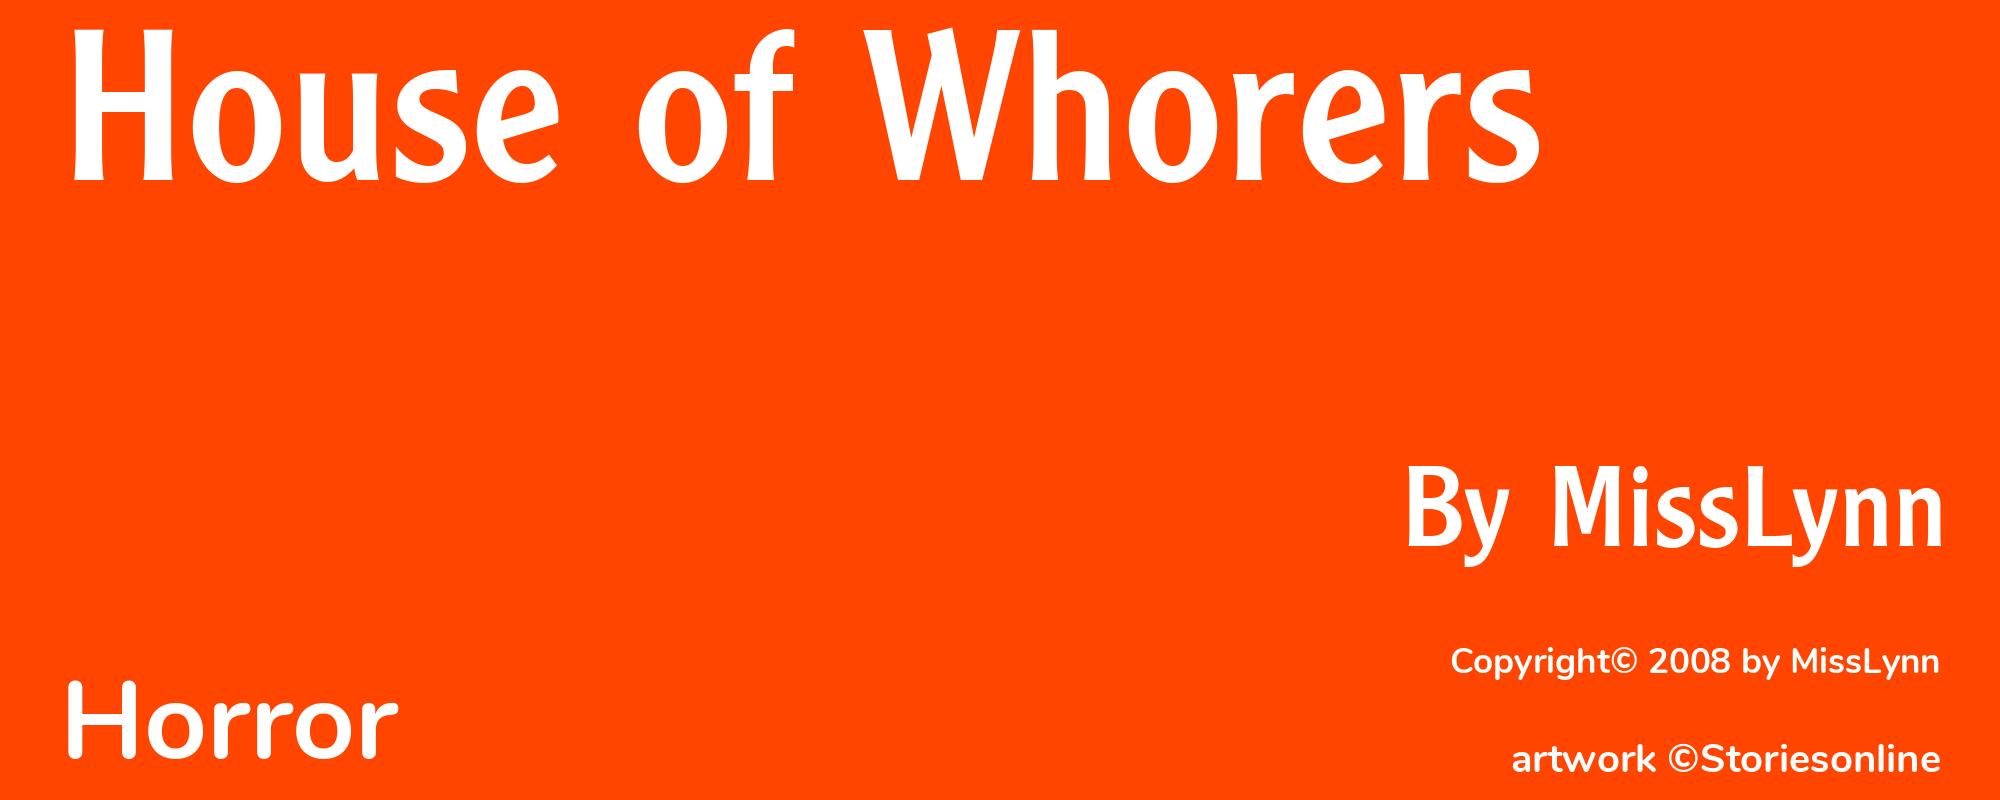 House of Whorers - Cover